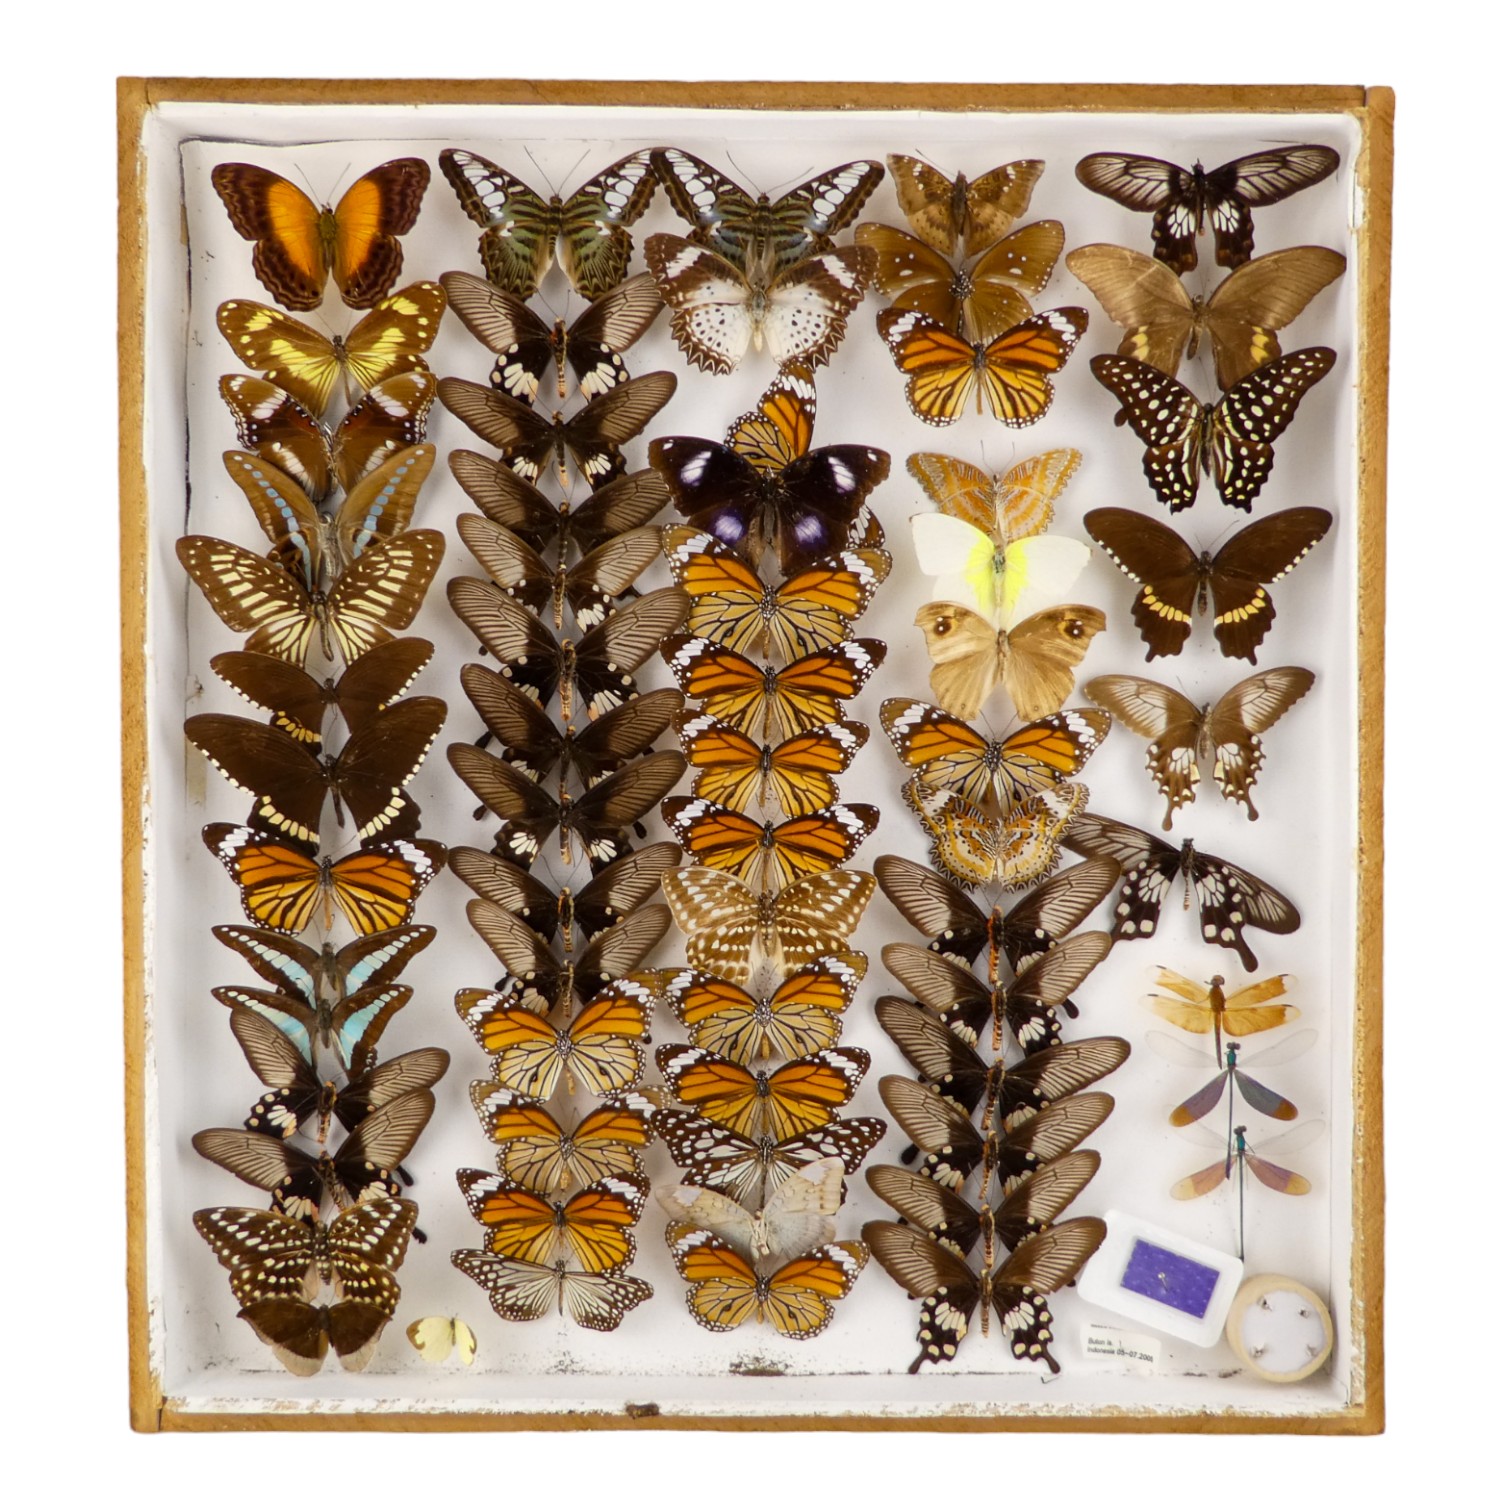 A case of butterflies in five rows - including Common Mormon and White Tiger